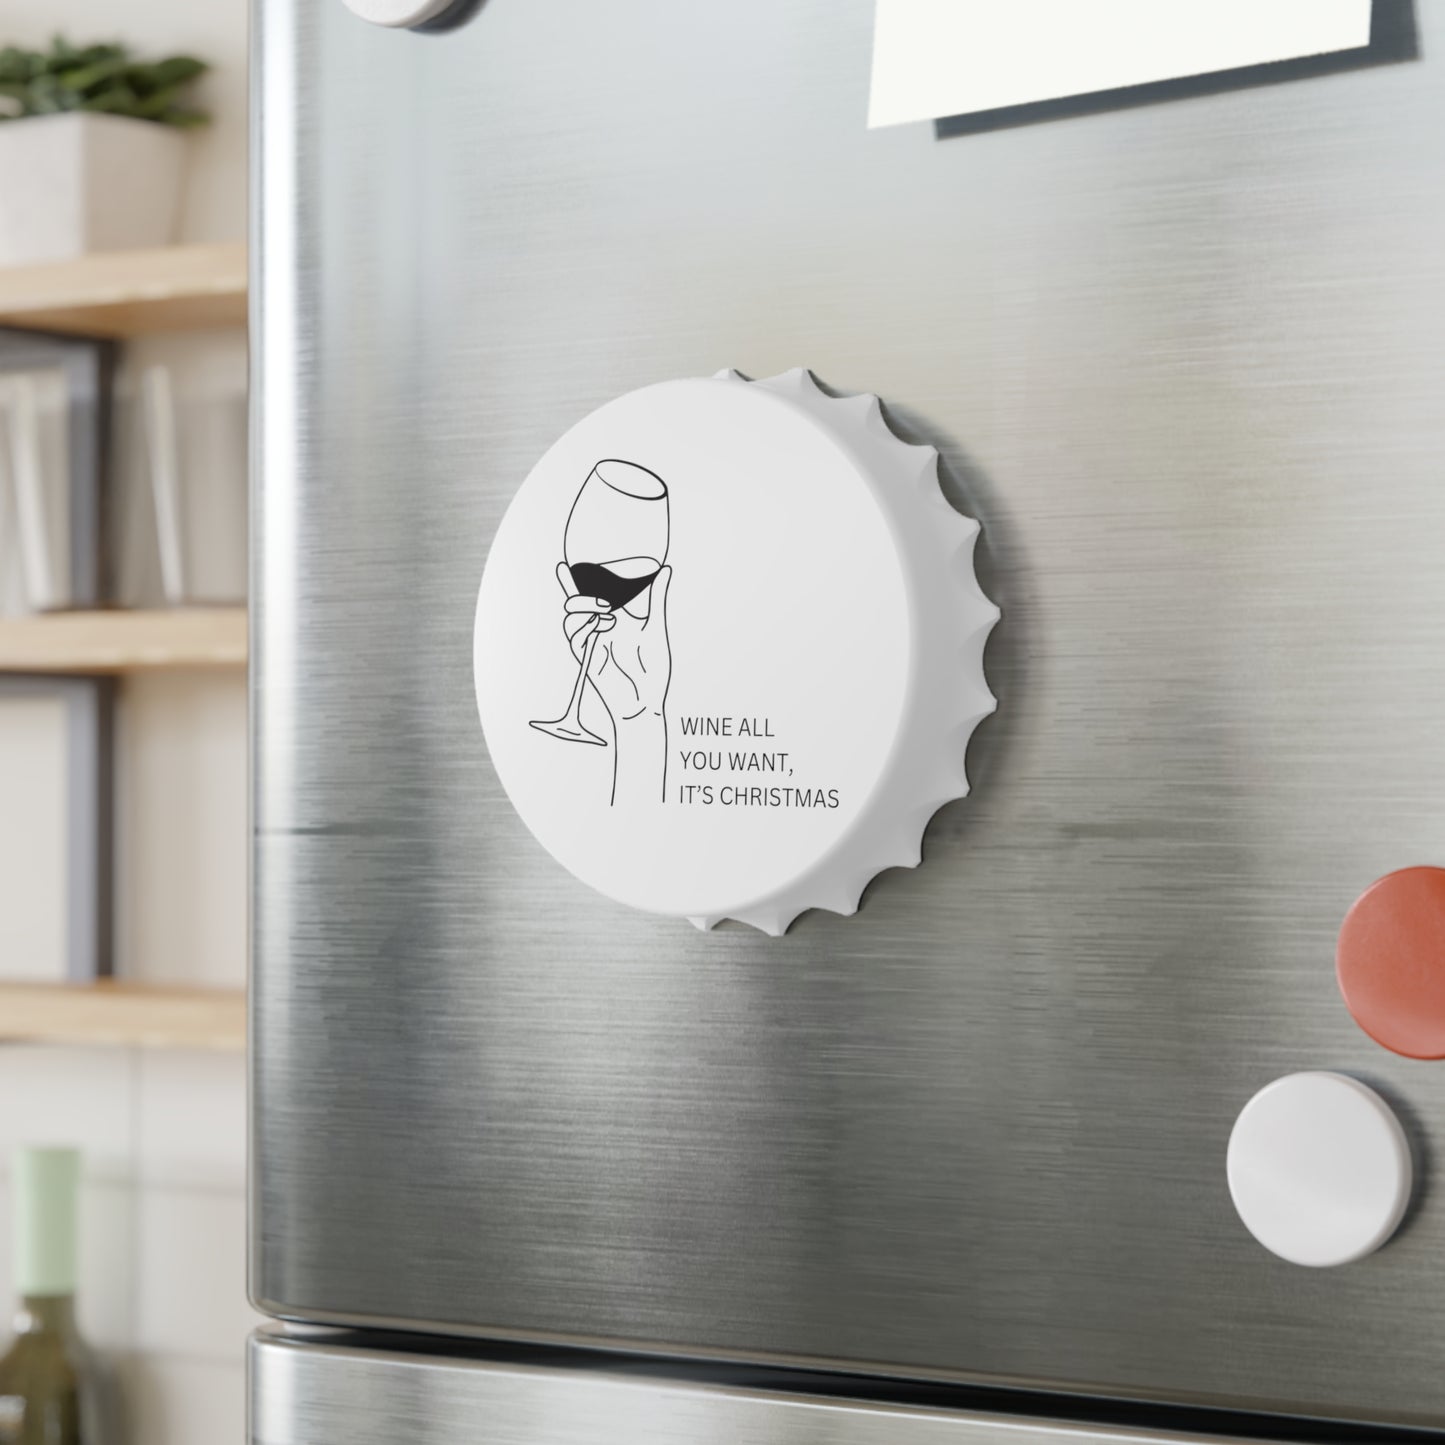 Magnetic Bottle Opener - Wine All You Want